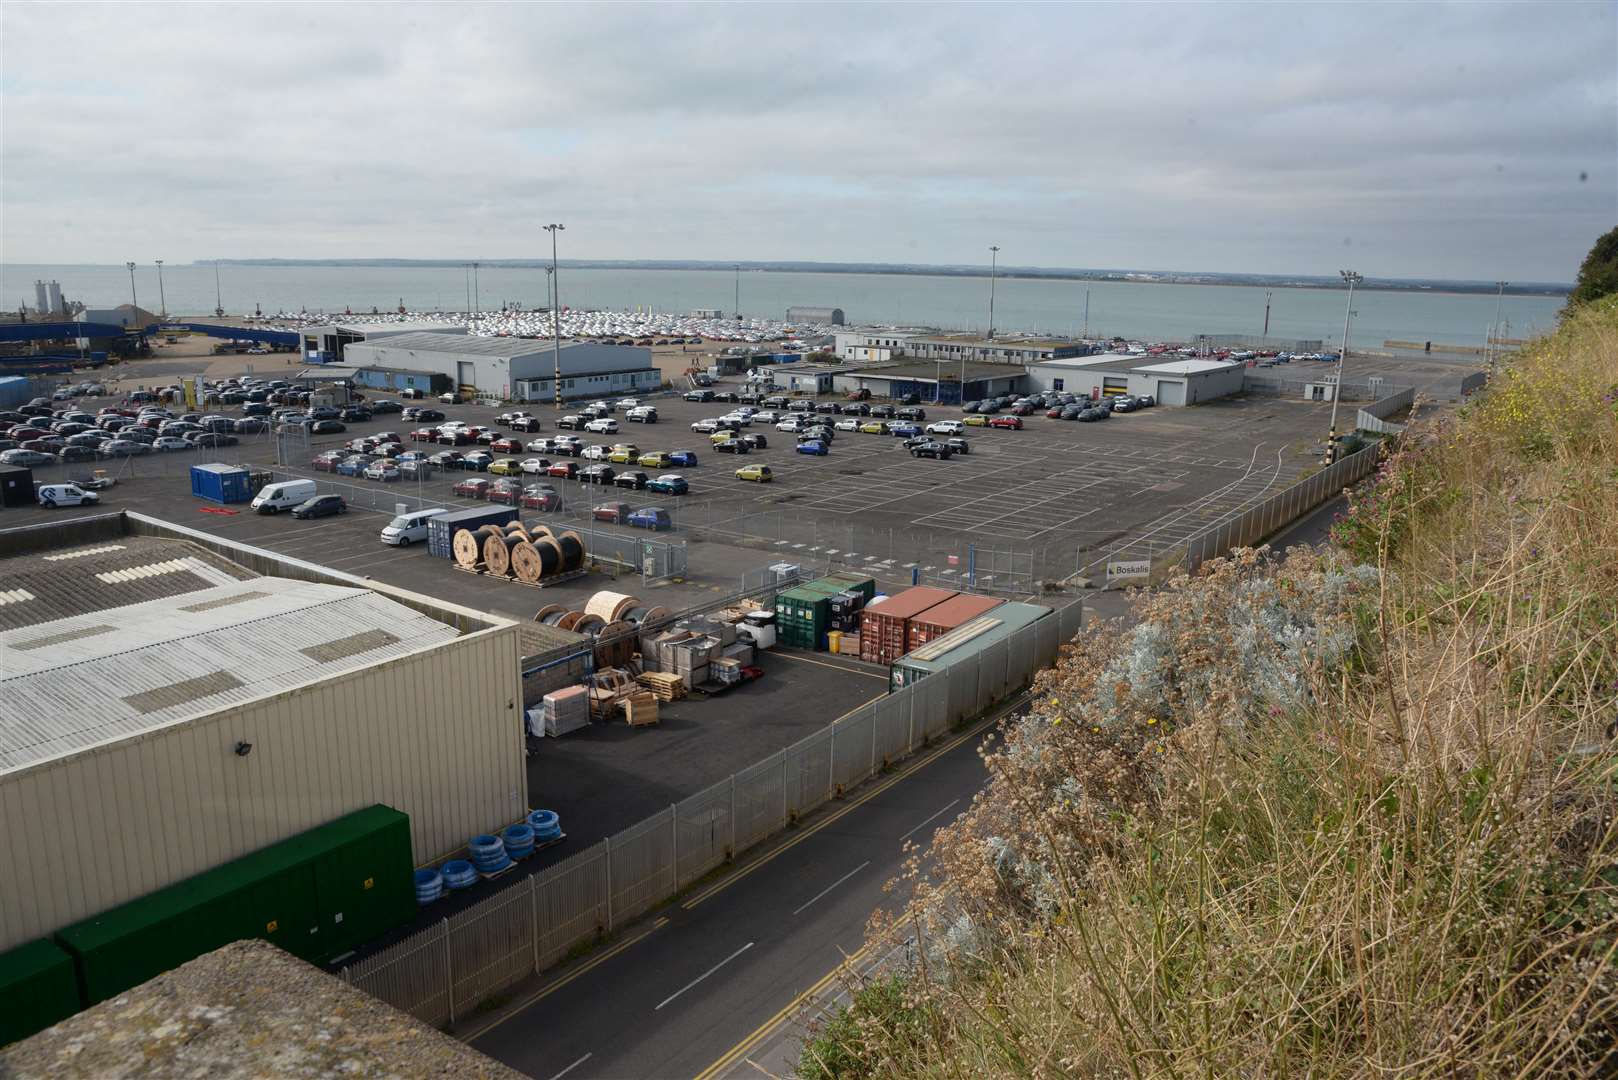 Land at the Port of Ramsgate could be used as a temporary tolerated site. Picture: Chris Davey. (16546720)